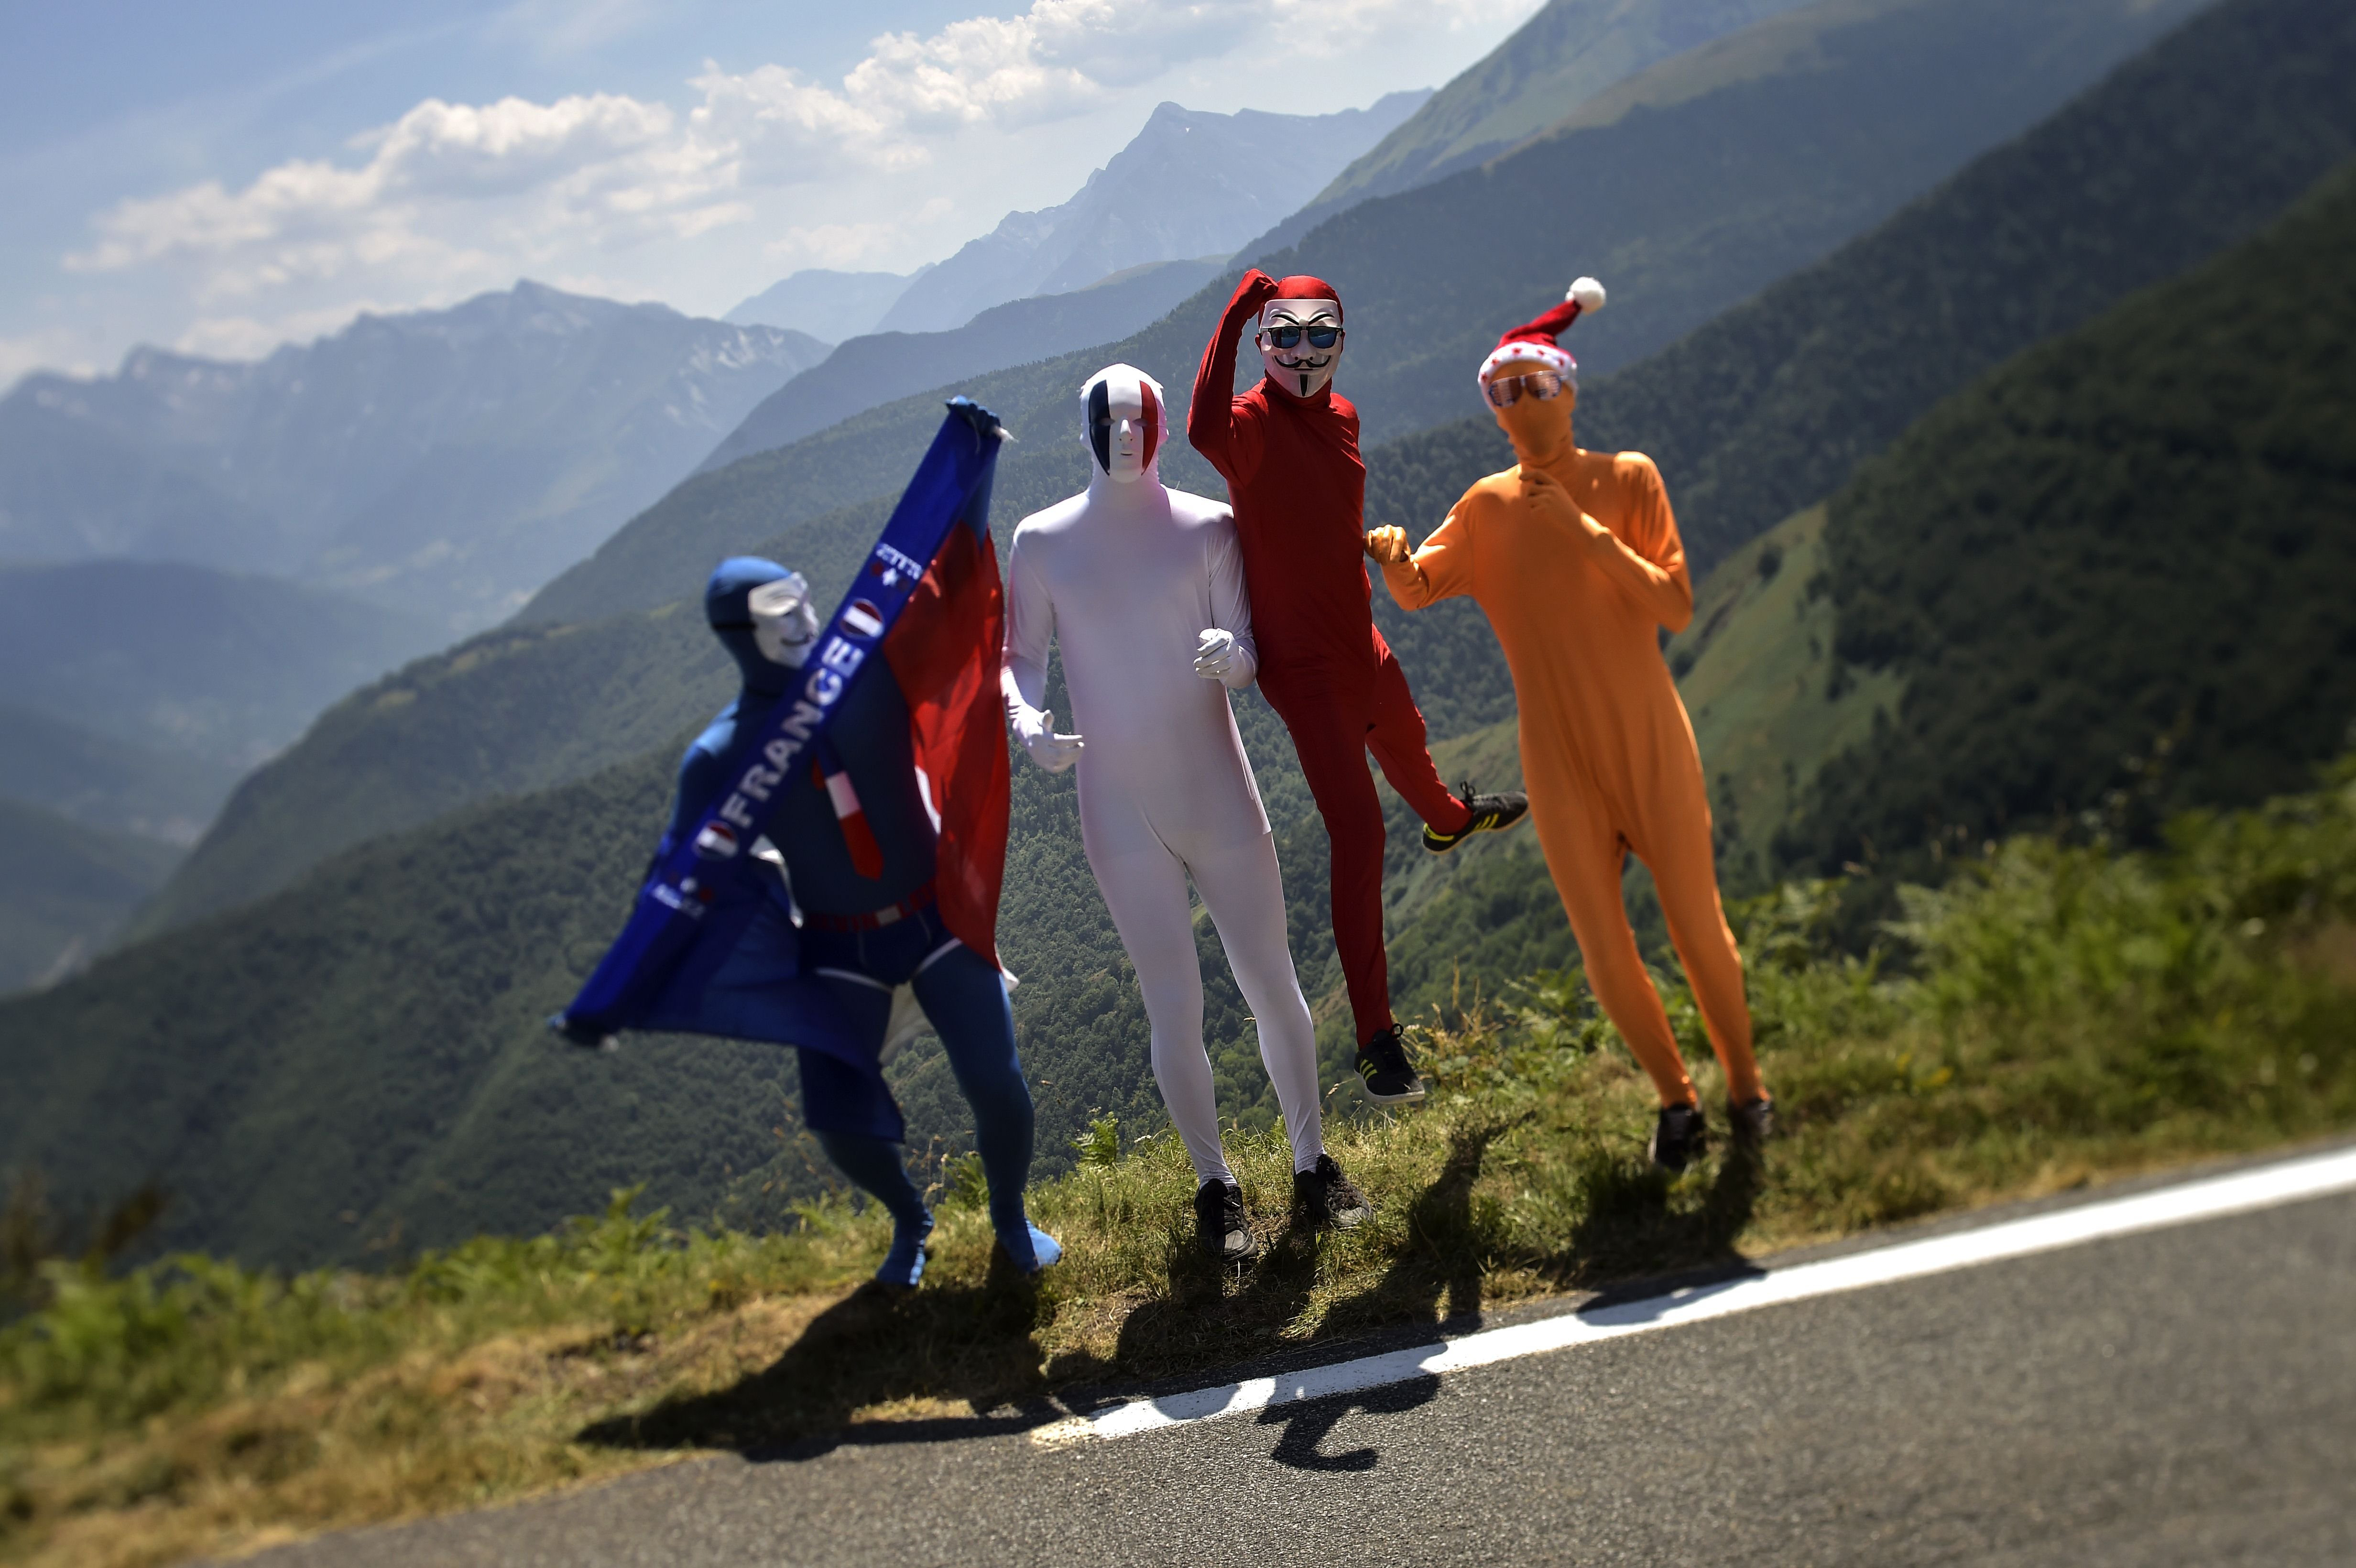 Disguised supporters wait along the road during the 11th stage of the race on July 15, 2015, between Pau and Cauterets, southwestern France.